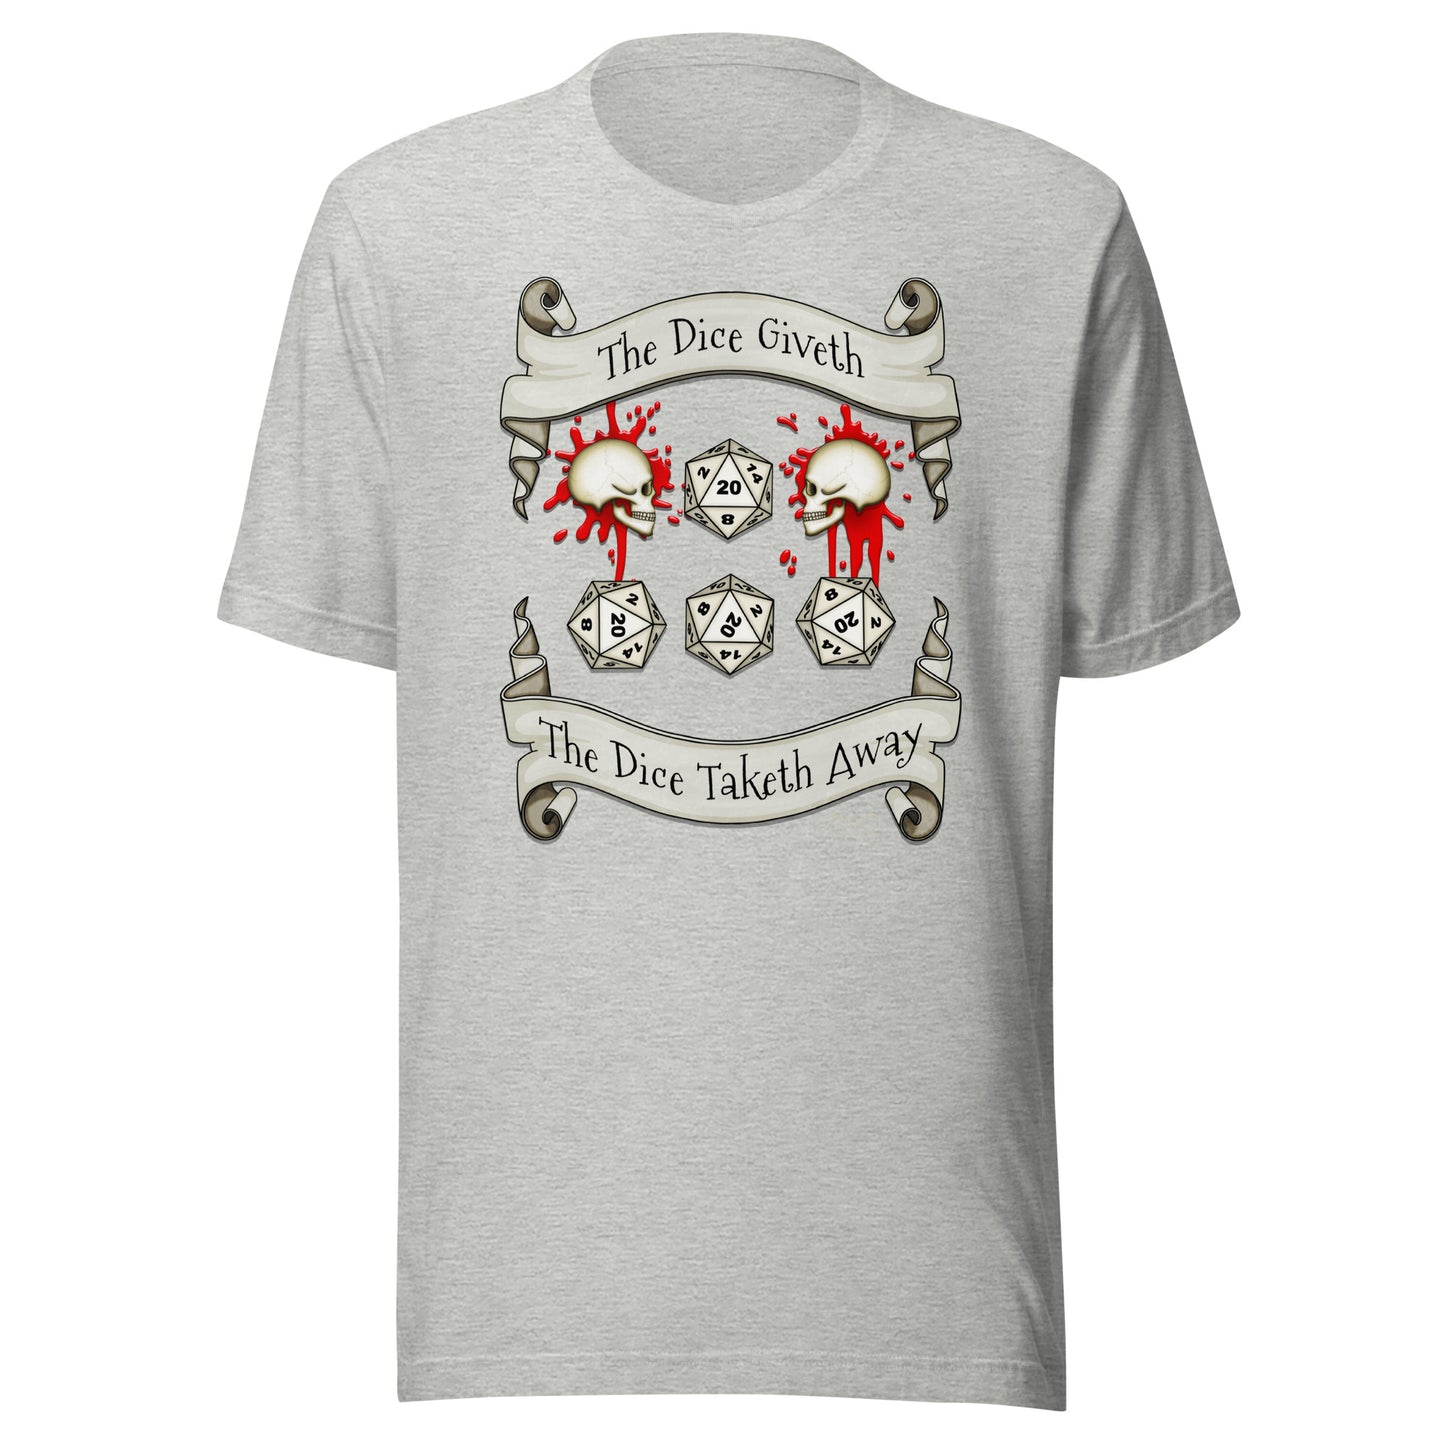 Dungeons and dragons D20 dice roll t-shirt light grey by stormseye design